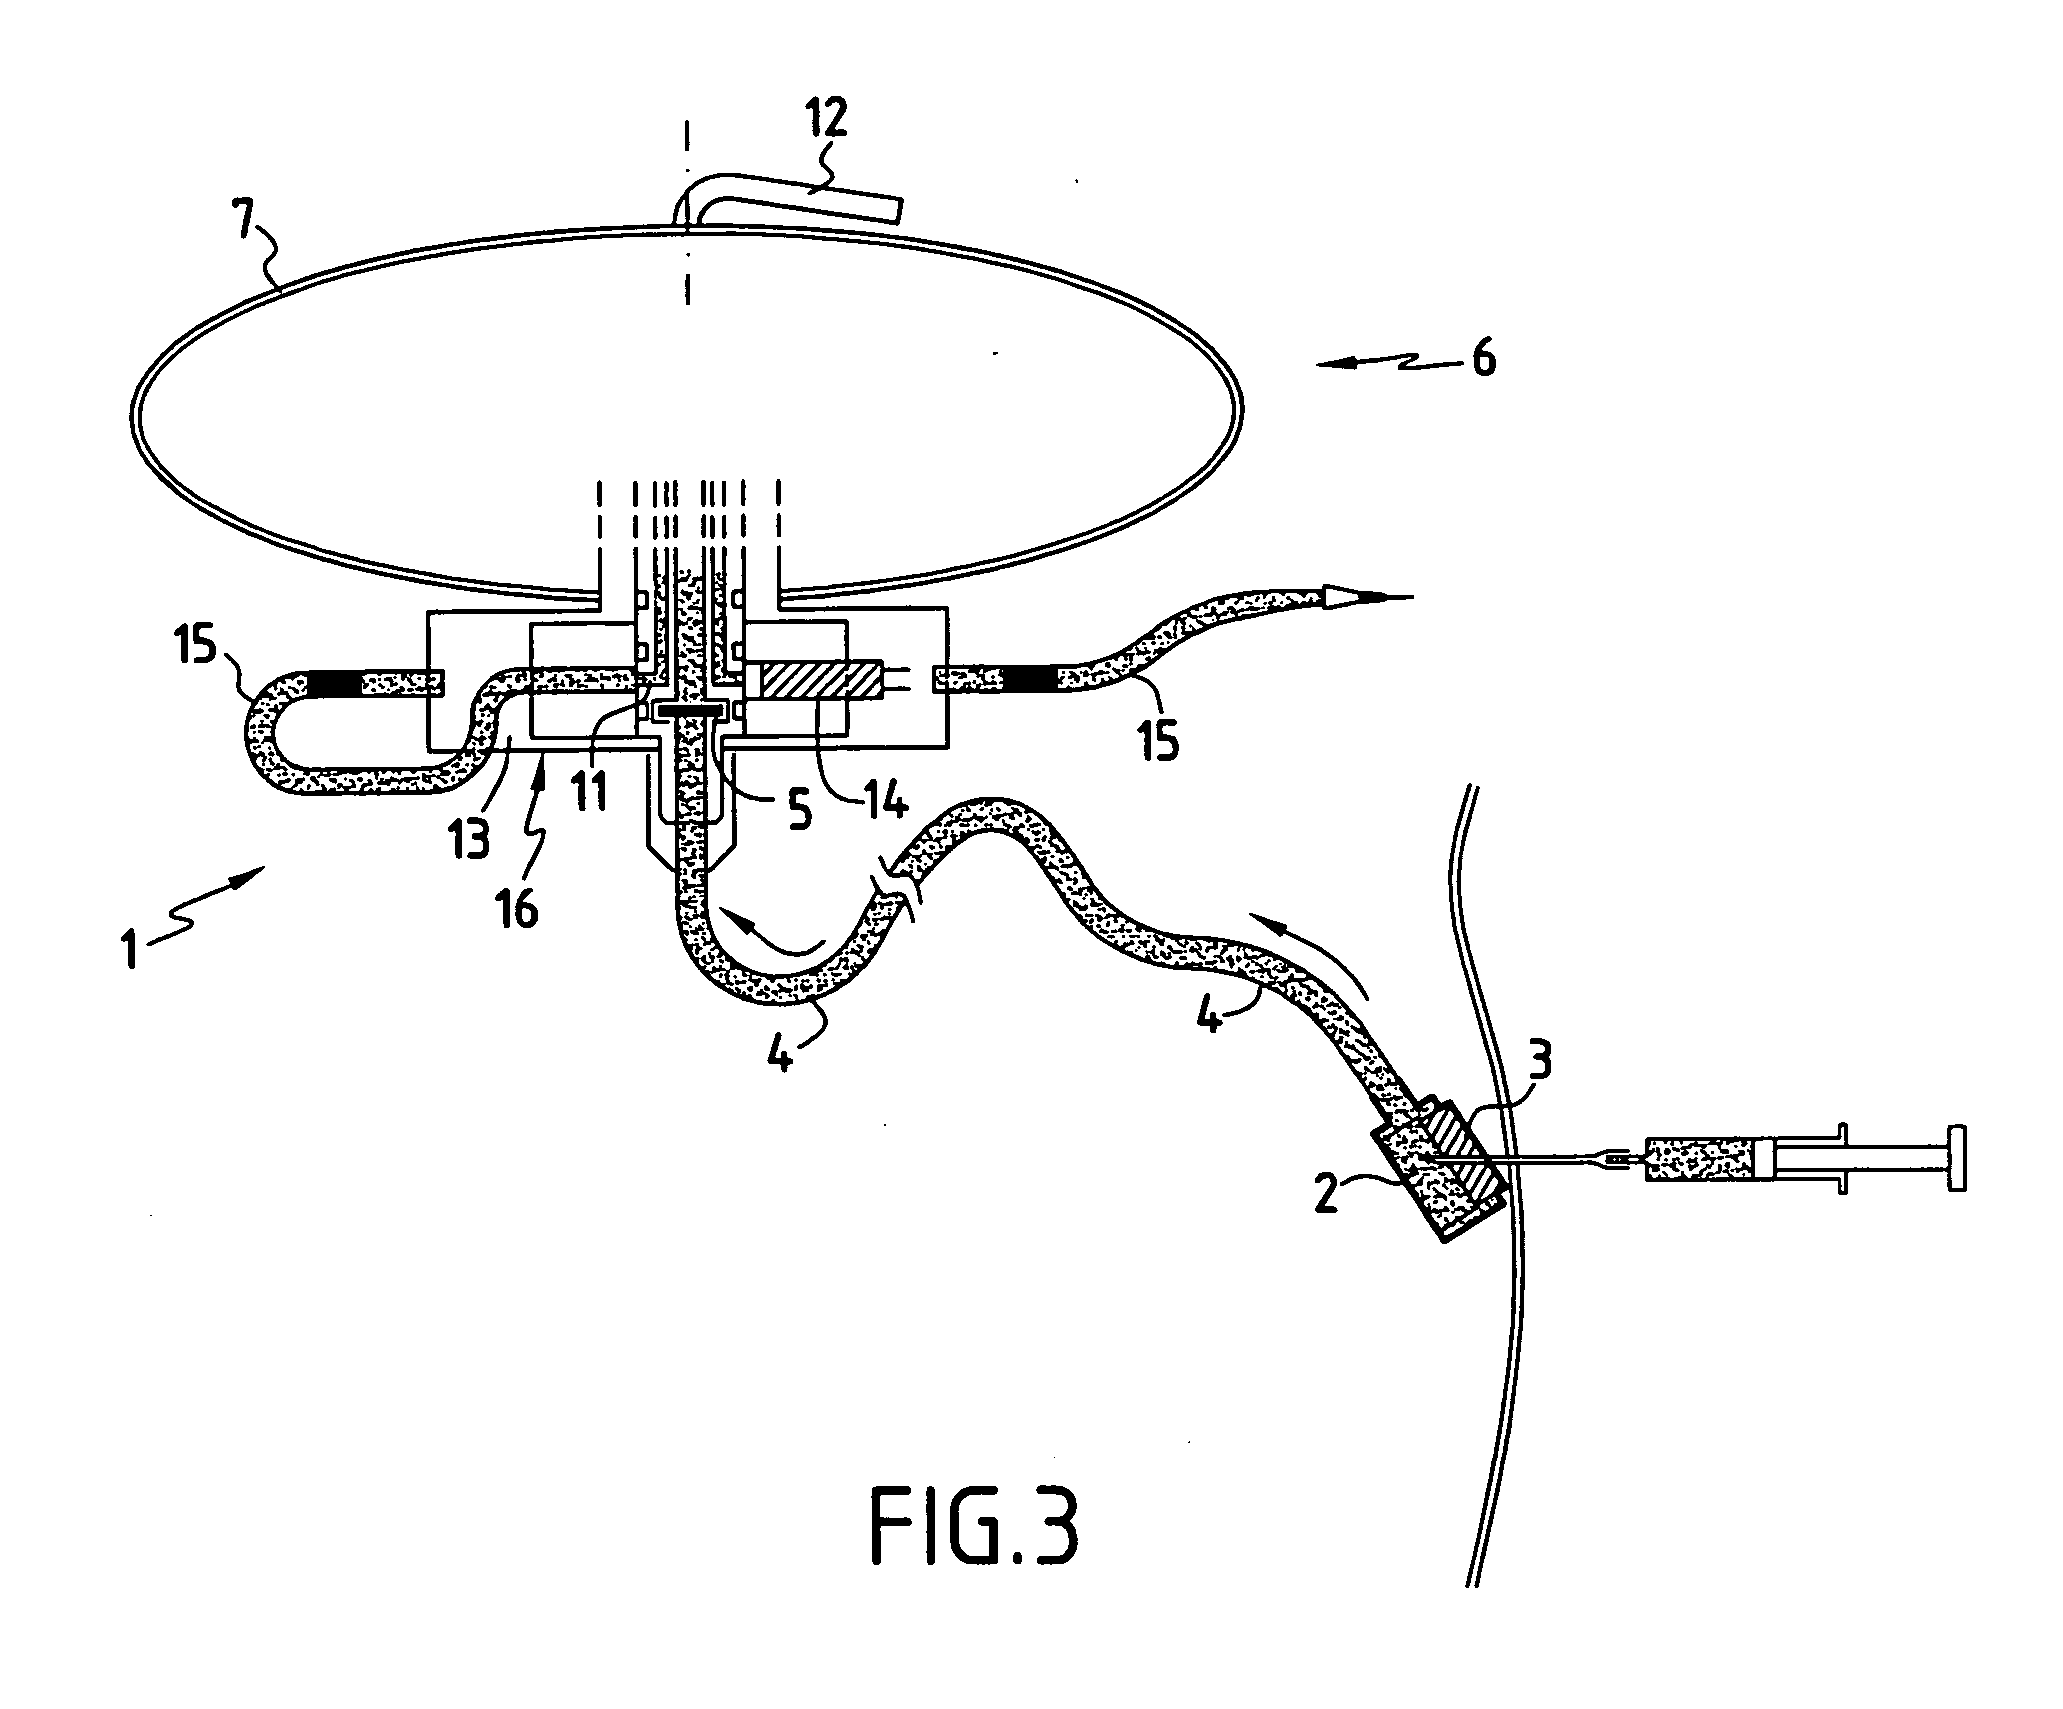 Implantable perfusion device